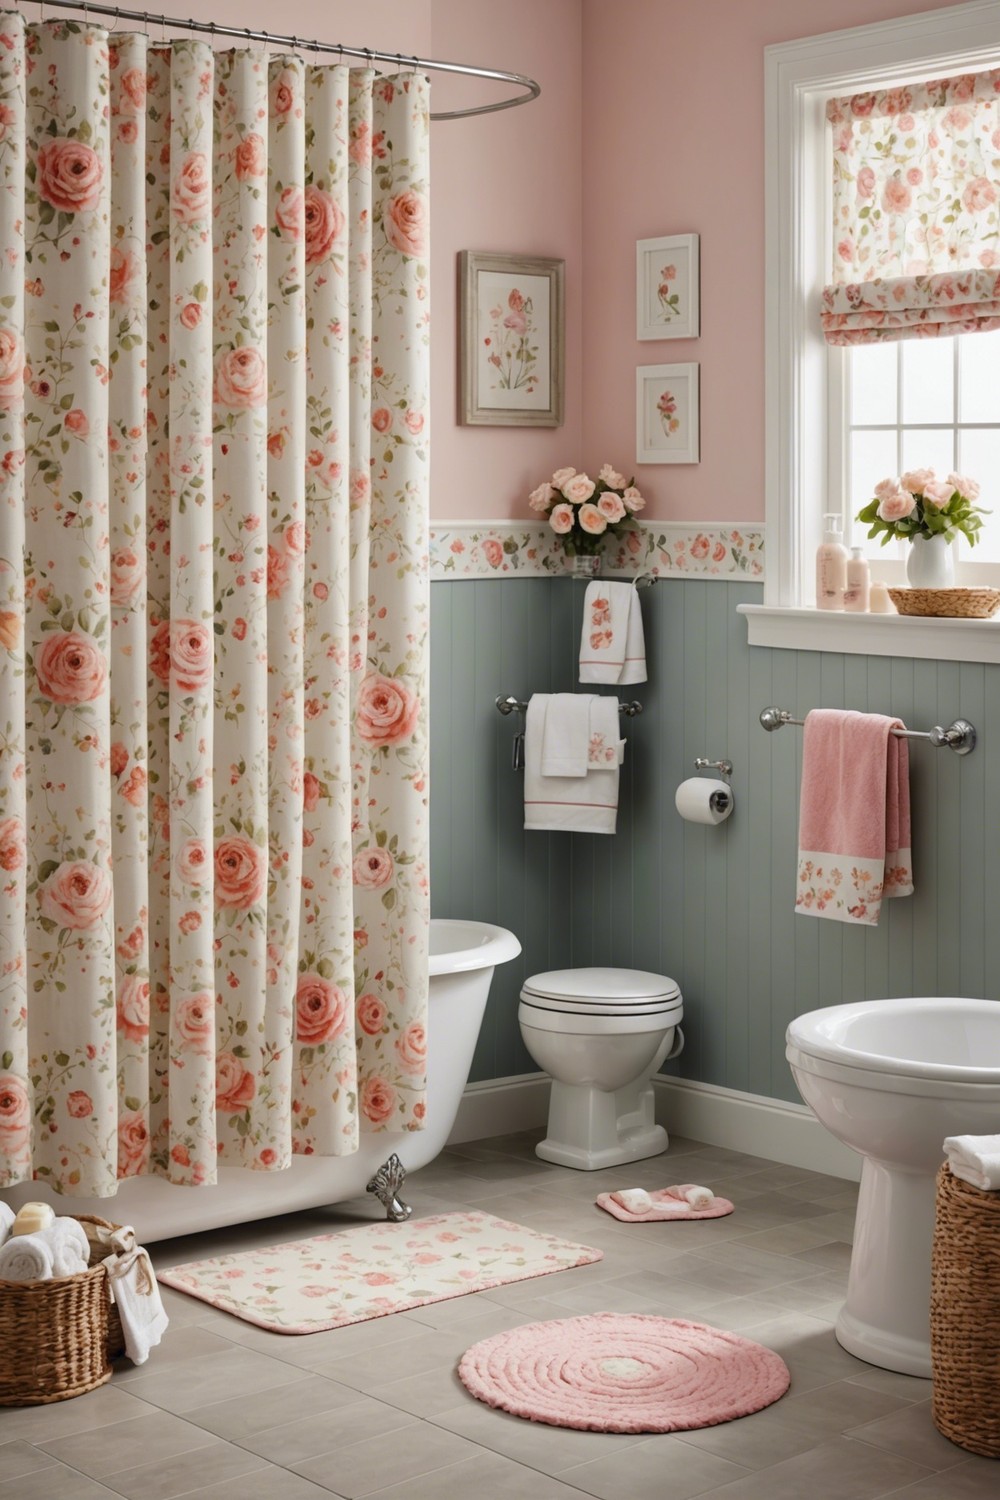 Floral Touches Throughout the Bathroom